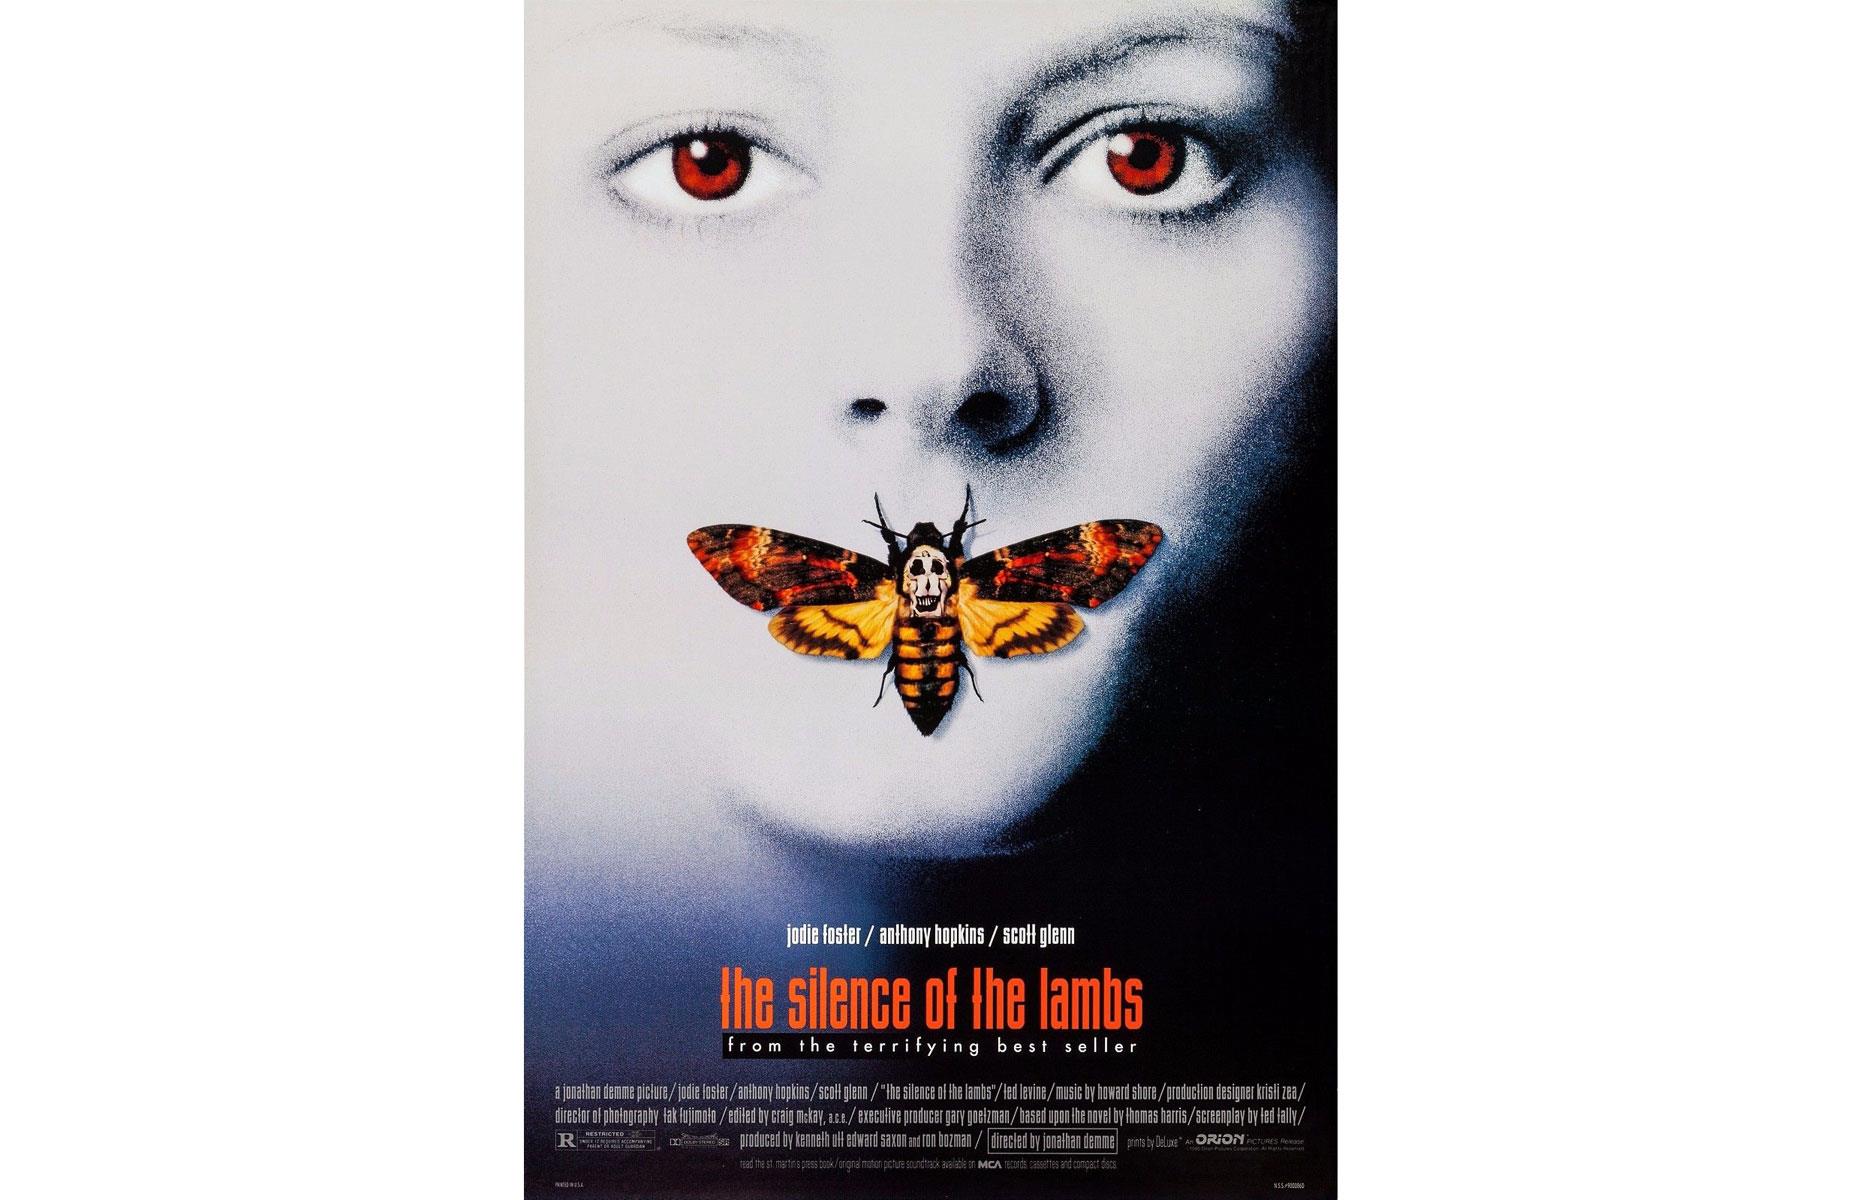 The Silence of the Lambs (American poster, 1991): up to $200 (£147)